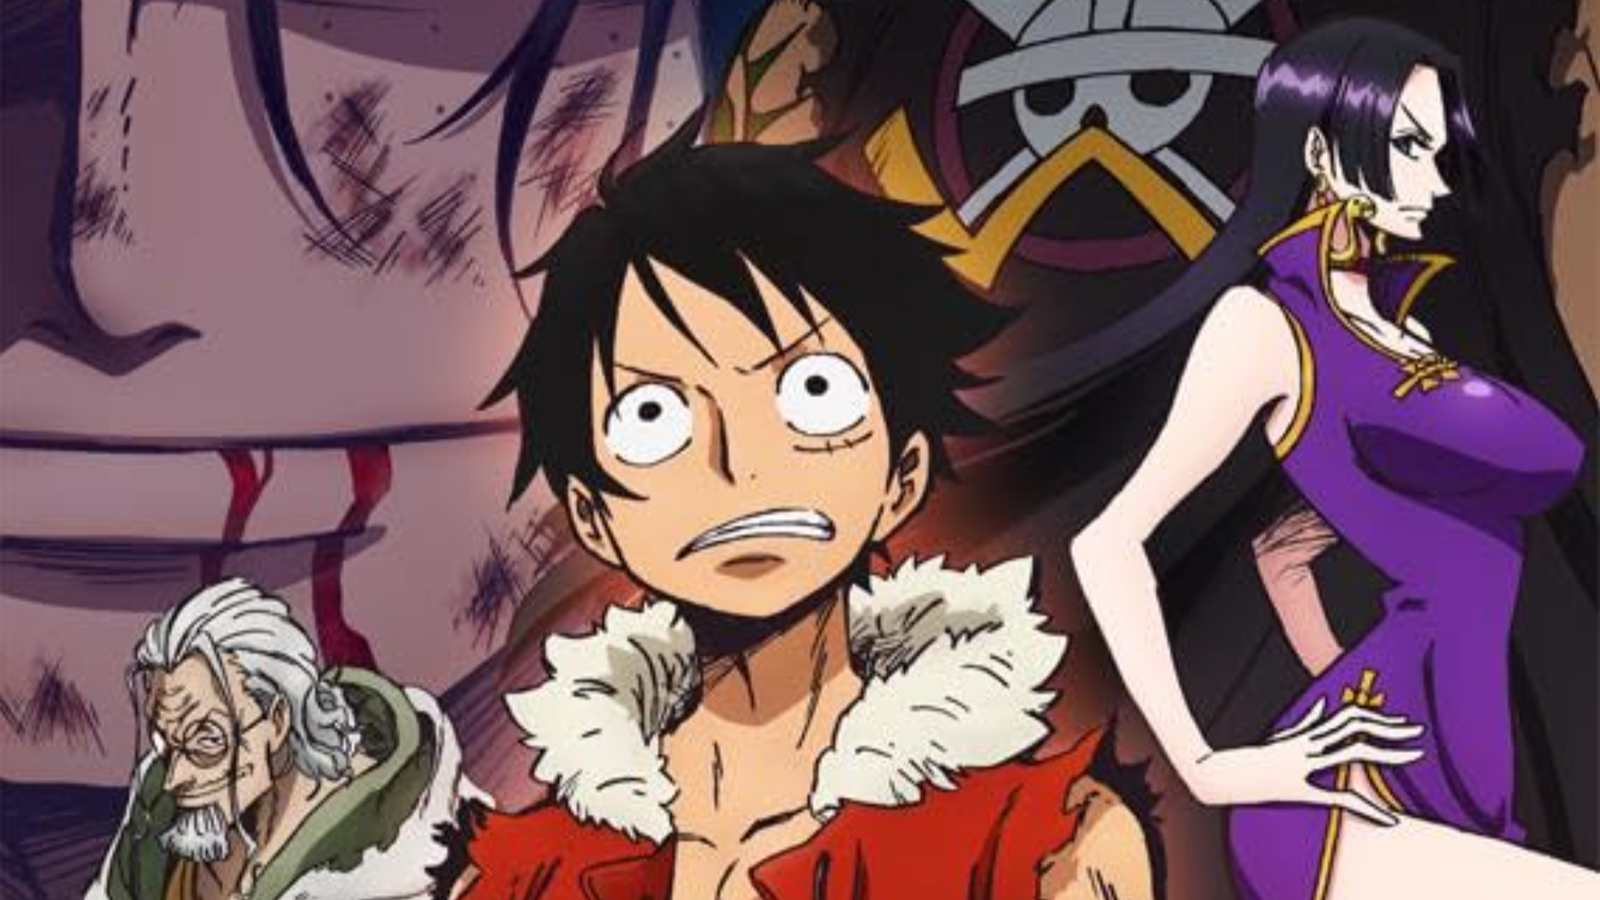 One Piece Film Gold's Limited Edition Includes Real Treasure Chest